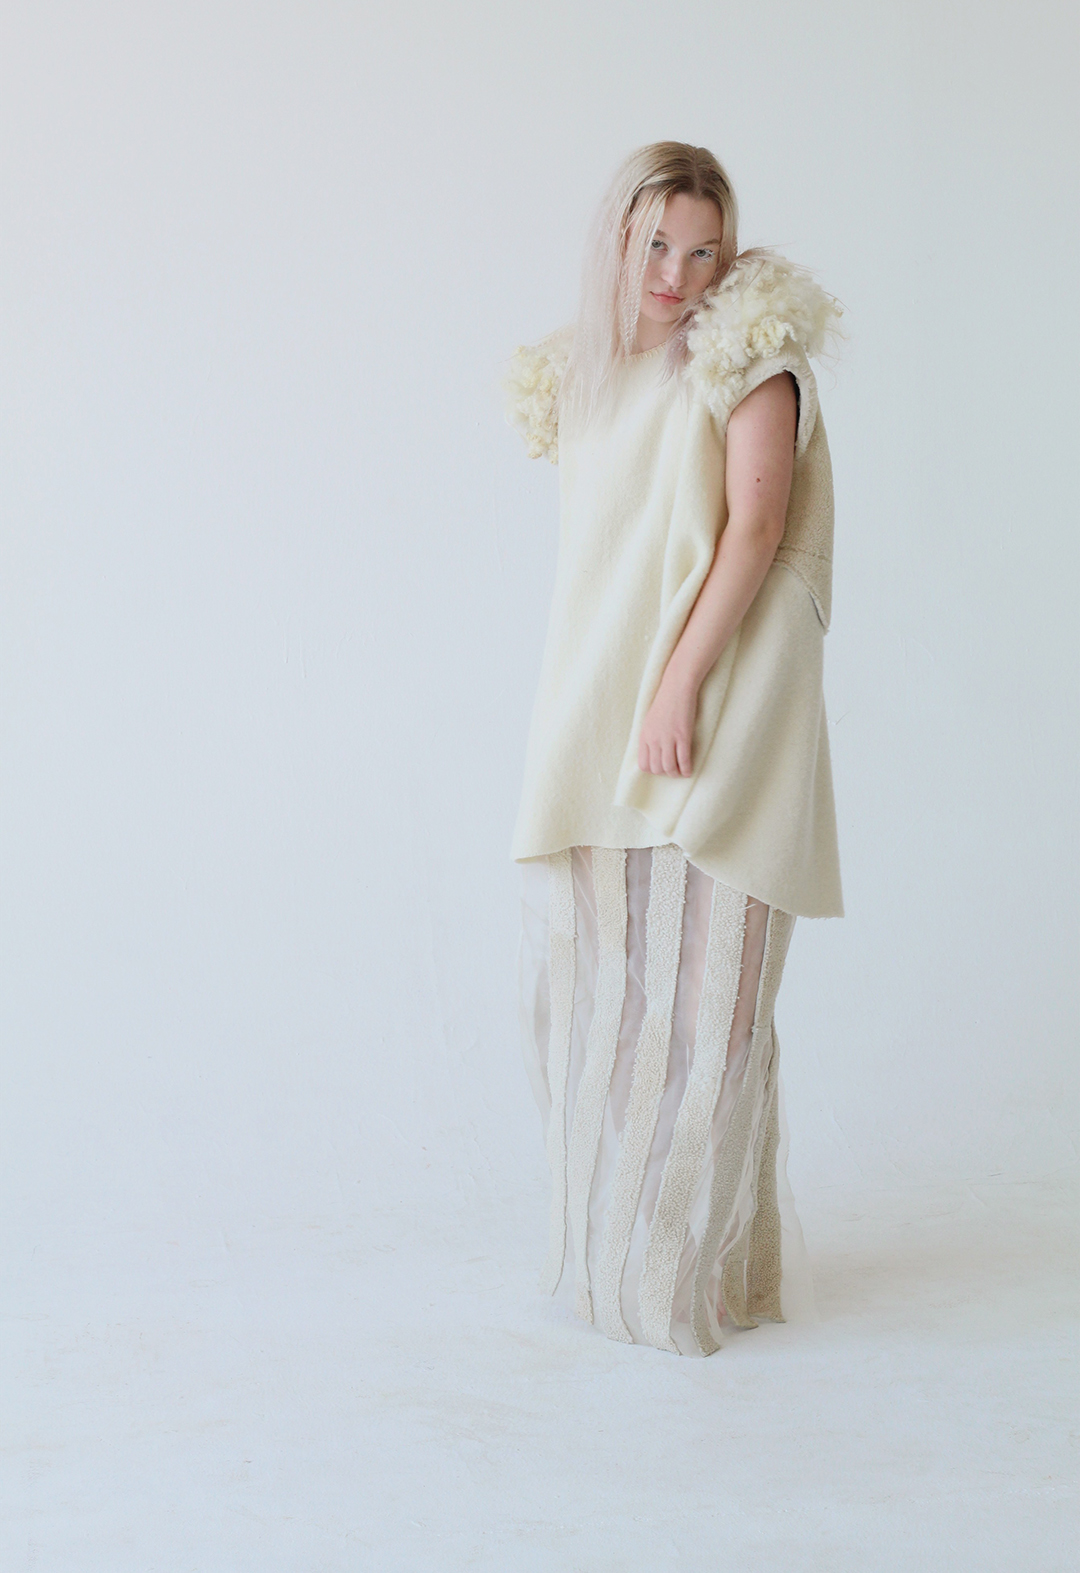 The photo shows the model standing in a sheer skirt made of silk organza, topped with lambskin shearling leather strips in a vertical stripe orientation.